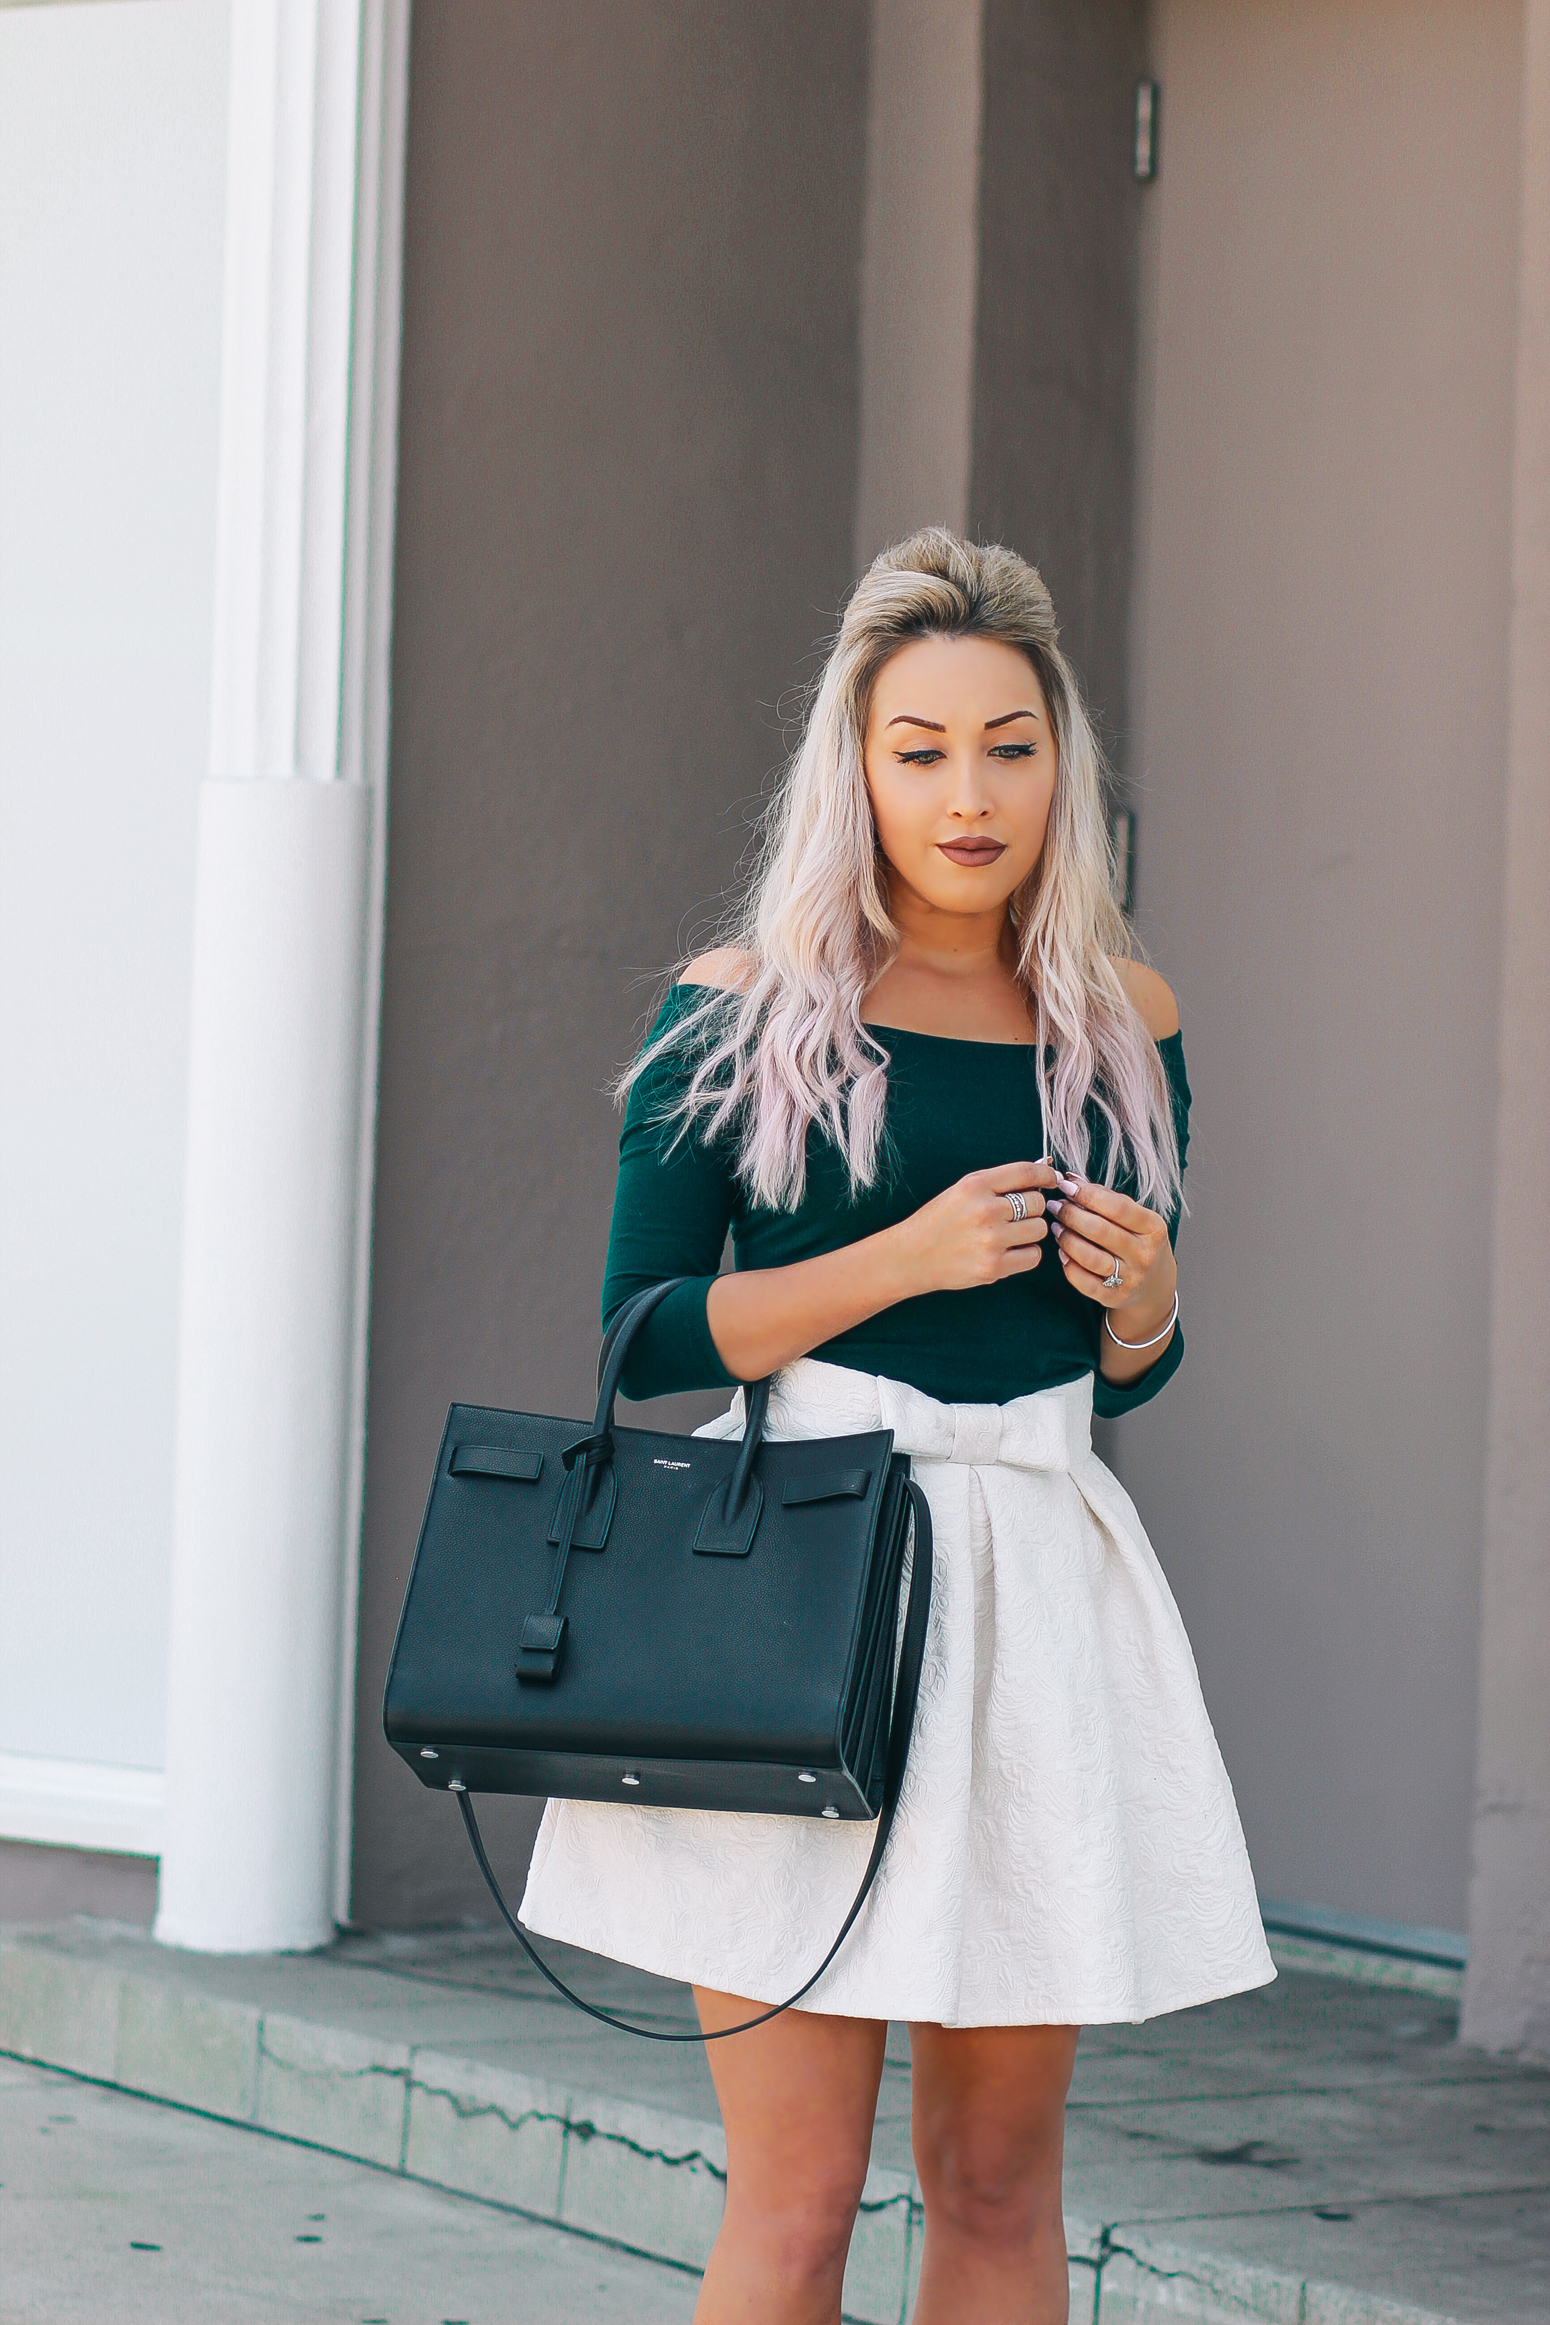 Blondie in the City | Forest Green & Ivory Lace | Chic Street Style Fashion